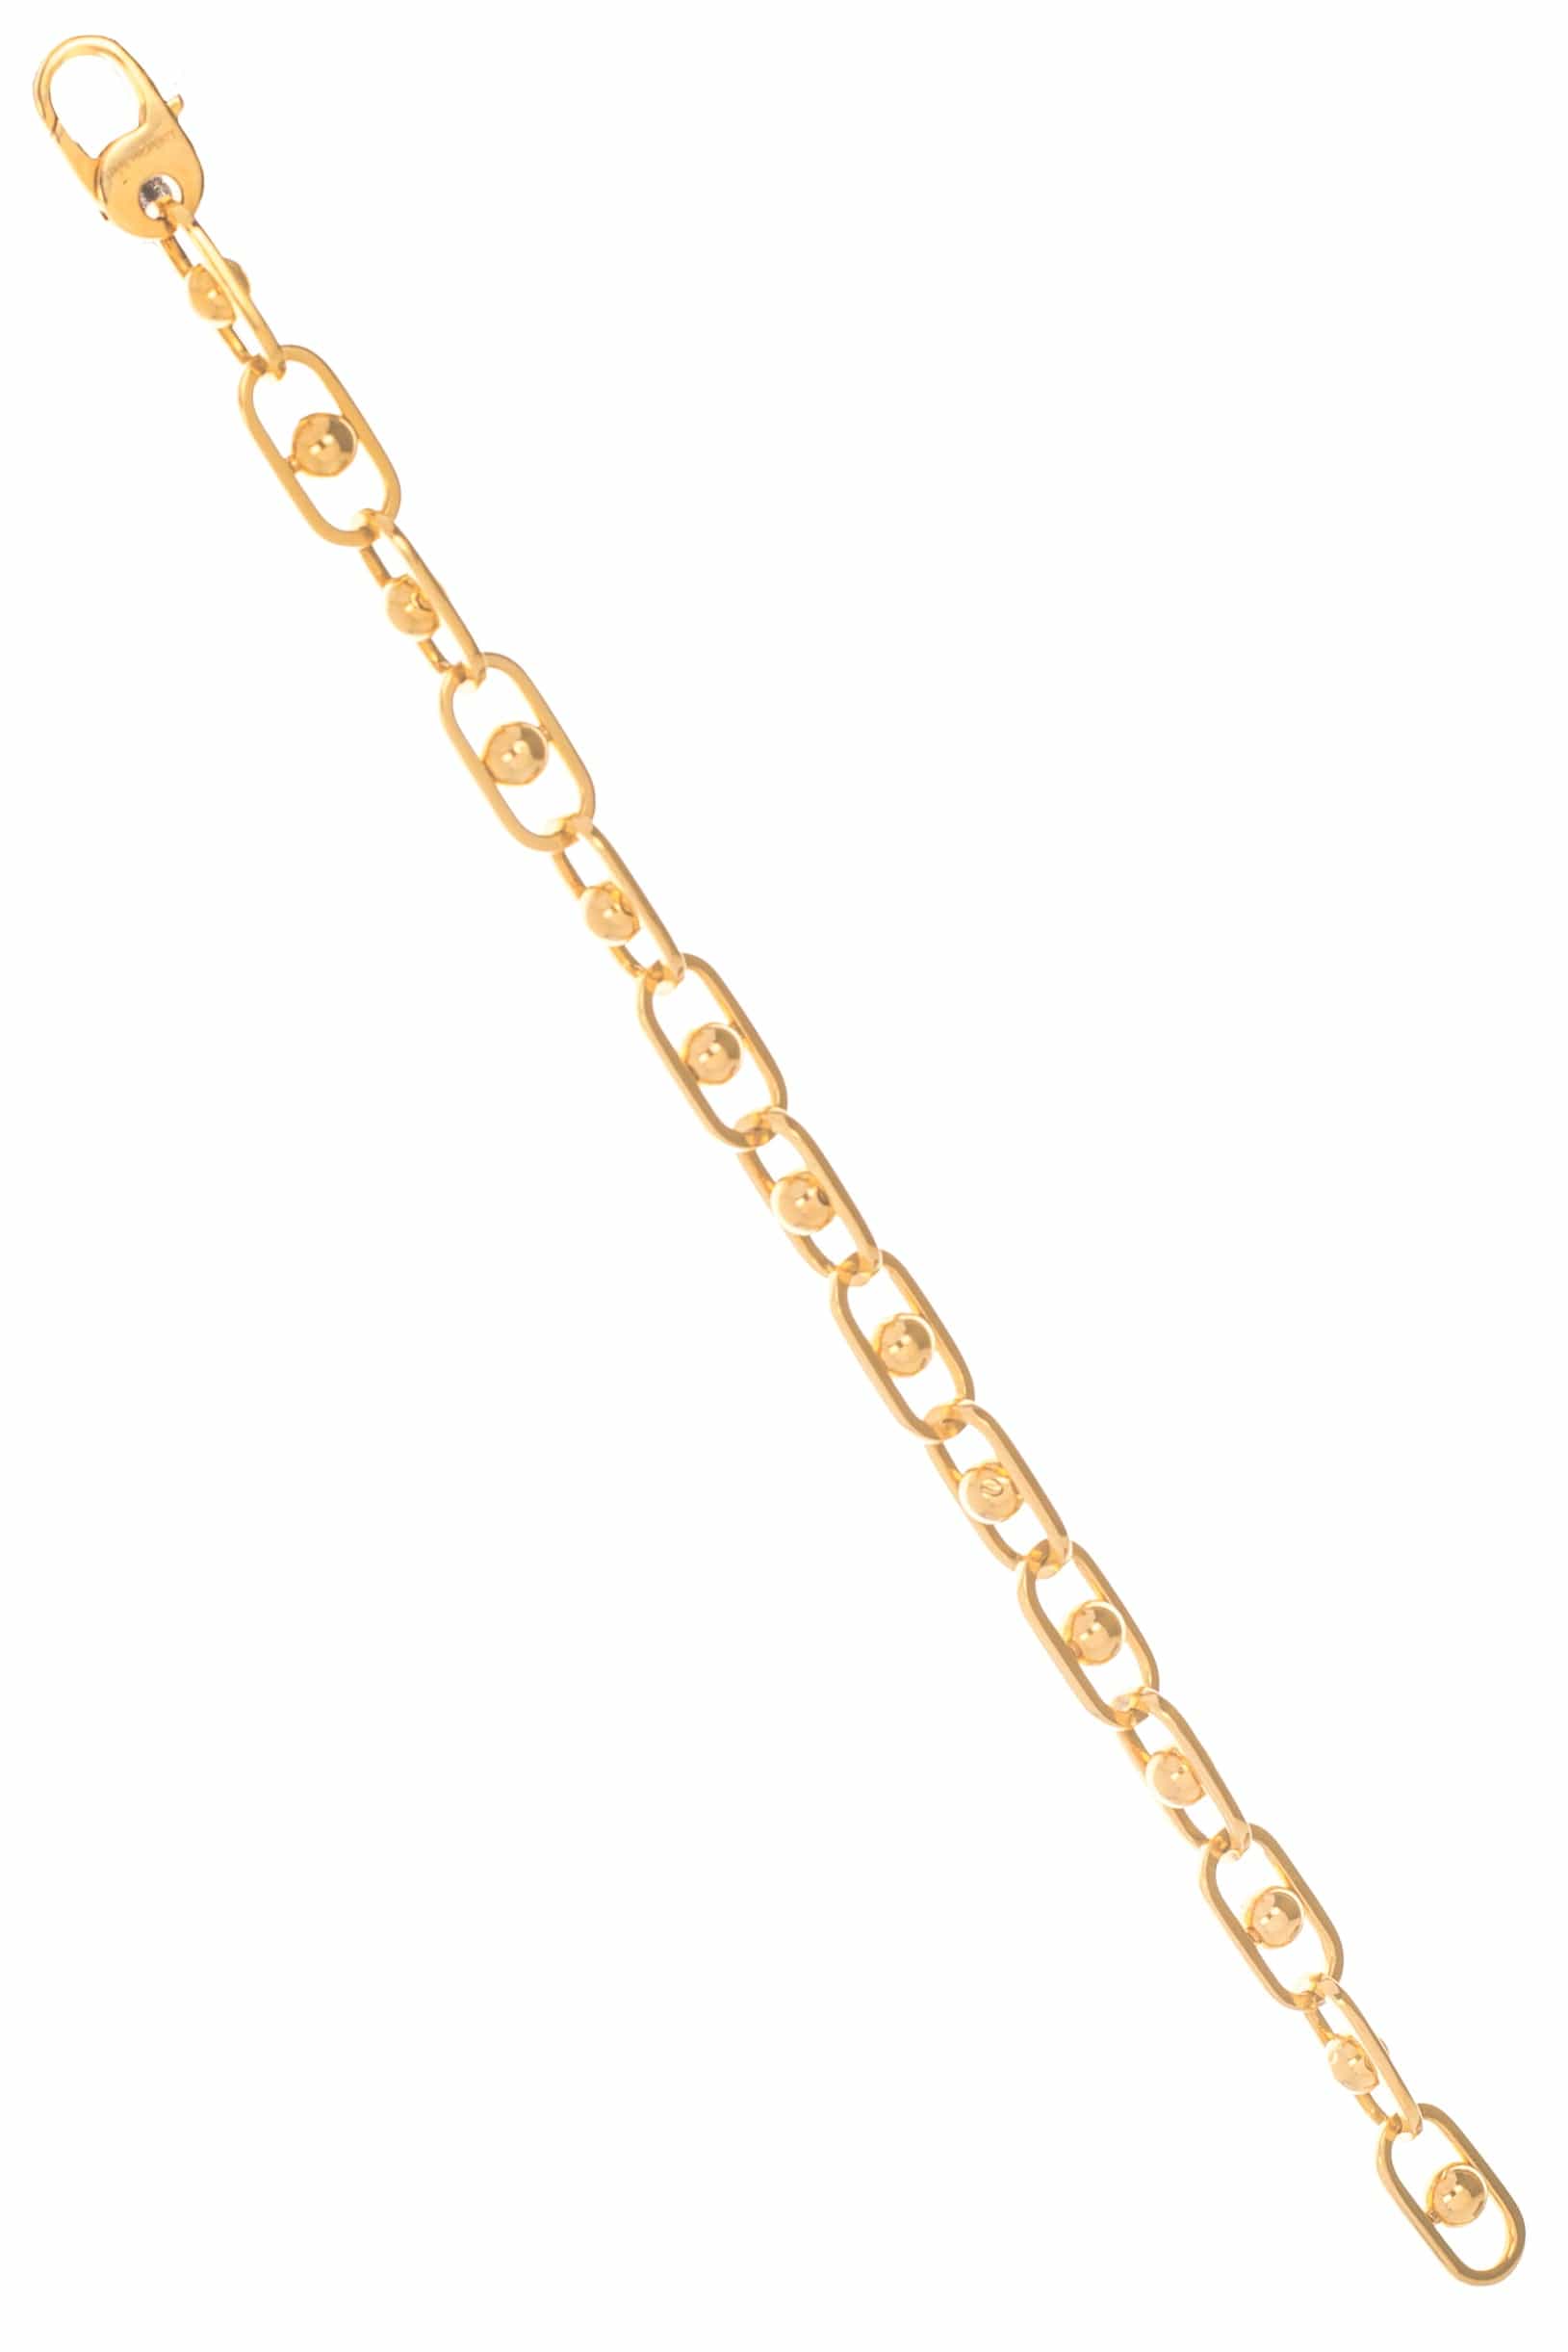 STATE PROPERTY-Allegory Bracelet-YELLOW GOLD